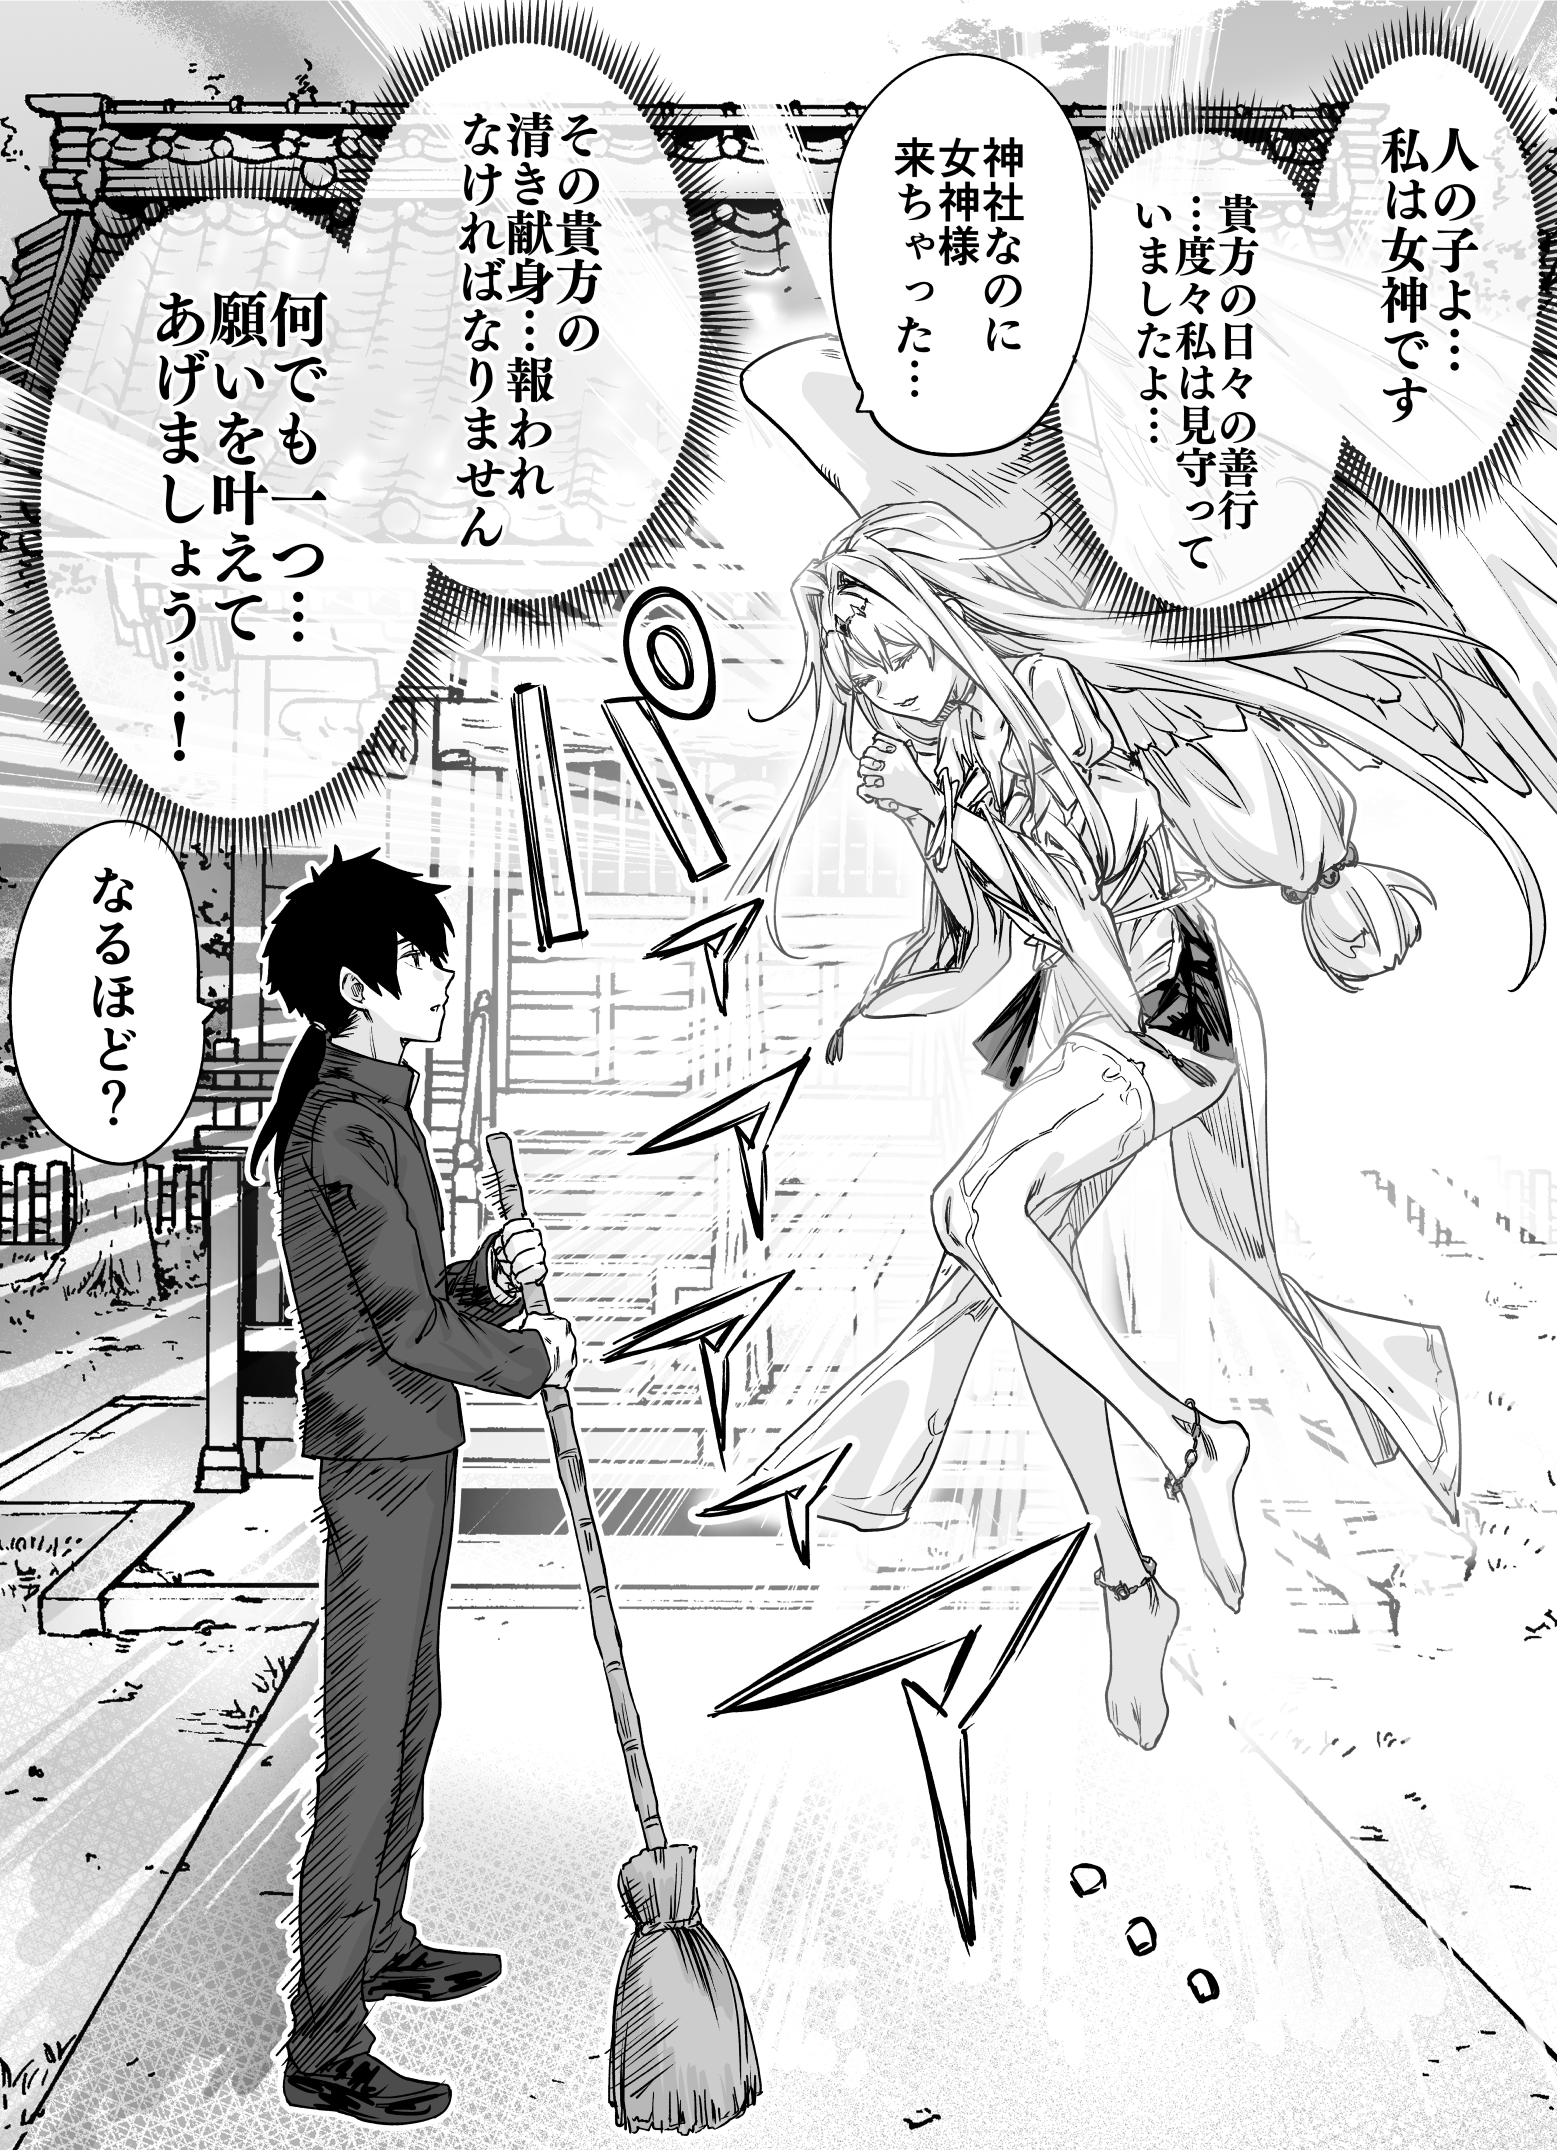 A Goddess Becoming Useless Due to an Overly Caring Man - MangaDex